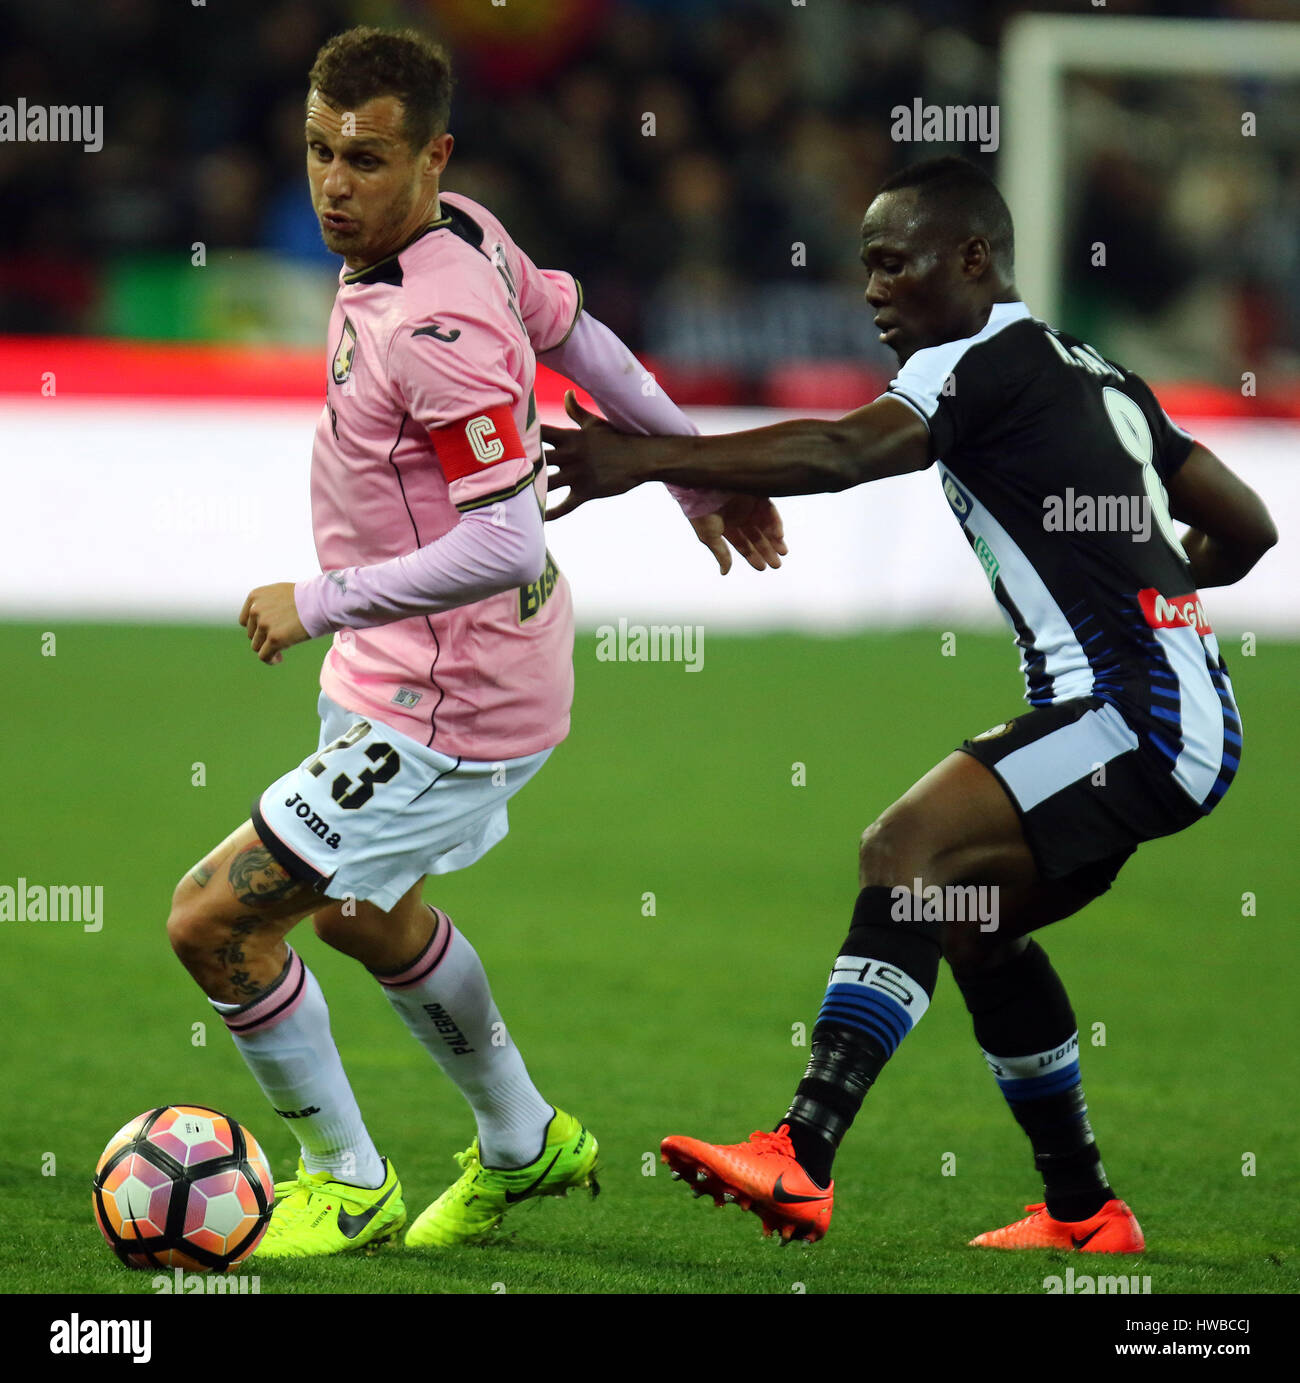 Udine, Italy. 19th March, 2017. Palermo's midfielder Alessandro Diamanti (L) vies with Udinese's midfielder Emmanuel Agyemang Badu (R) during the Serie A football match between Udinese Calcio v US Citta di Palermo at Dacia Arena Stadium on 19th March, 2017. Credit: Andrea Spinelli/Alamy Live News Stock Photo